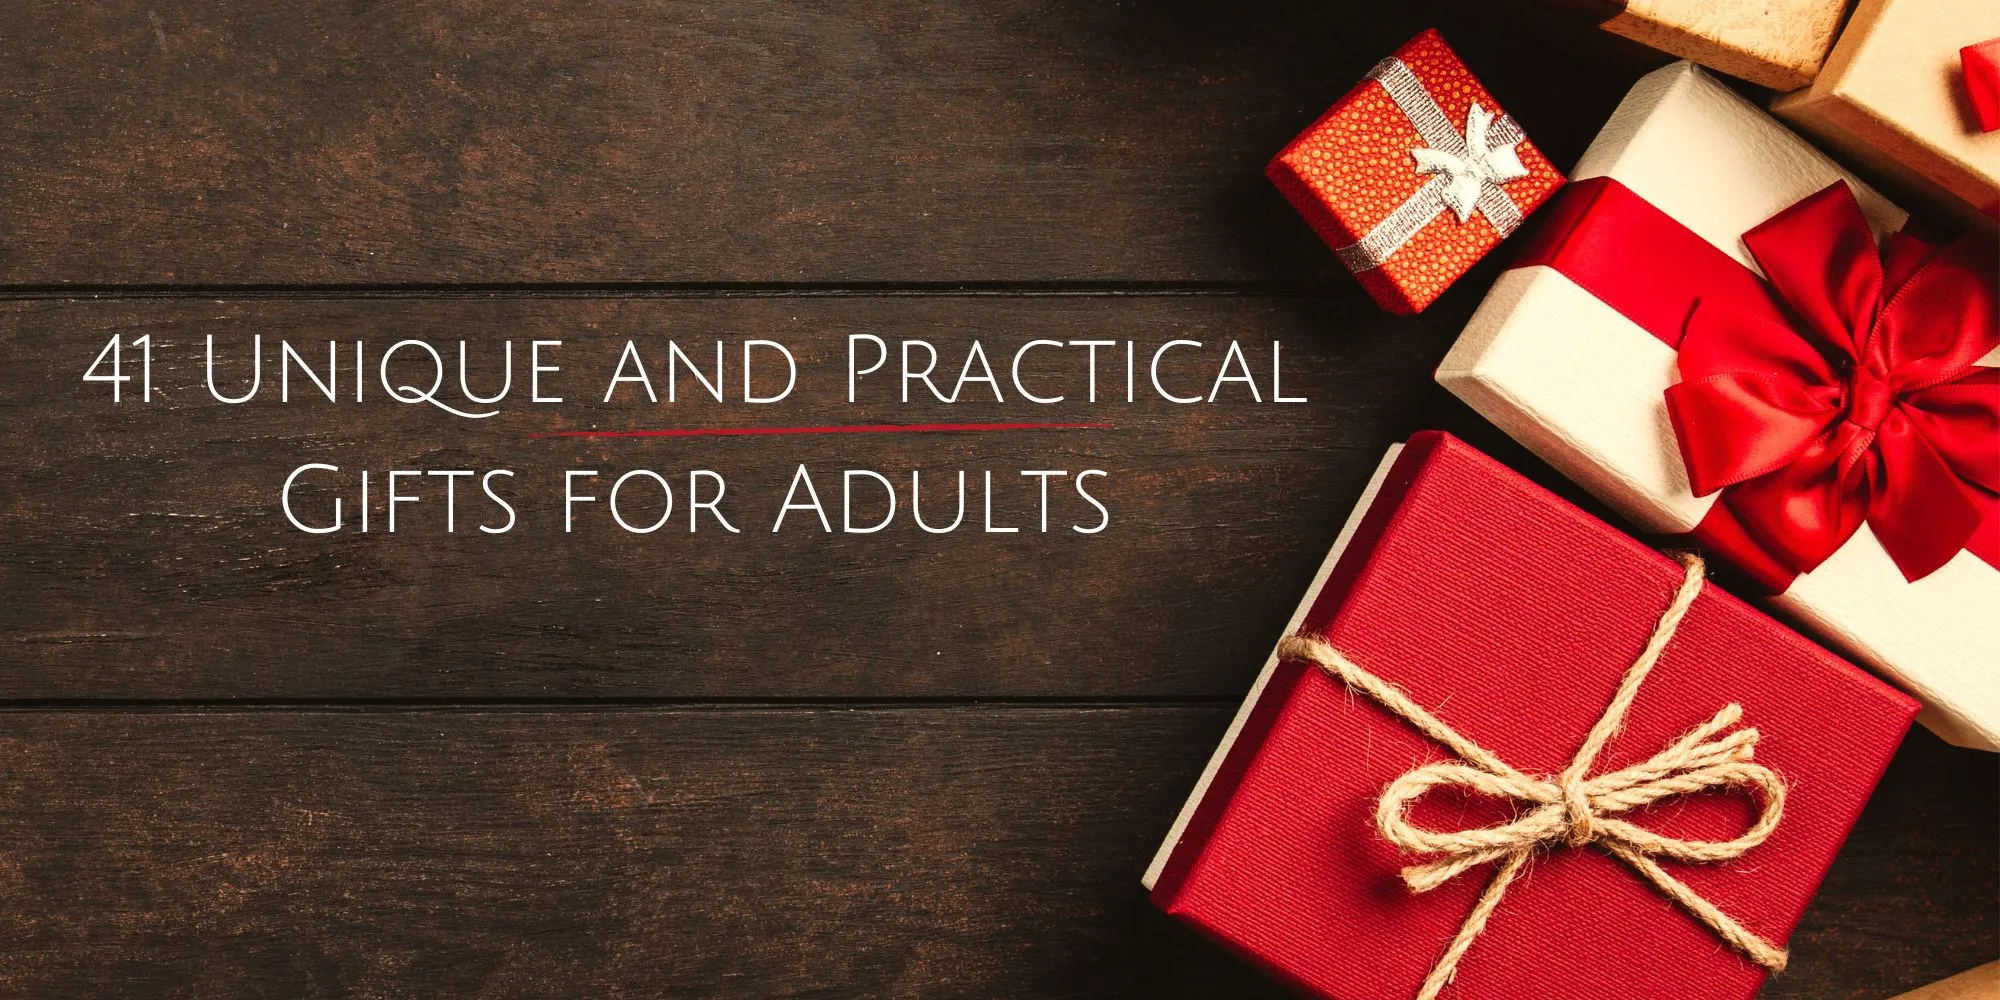 41 Unique and Practical Gifts for Adults